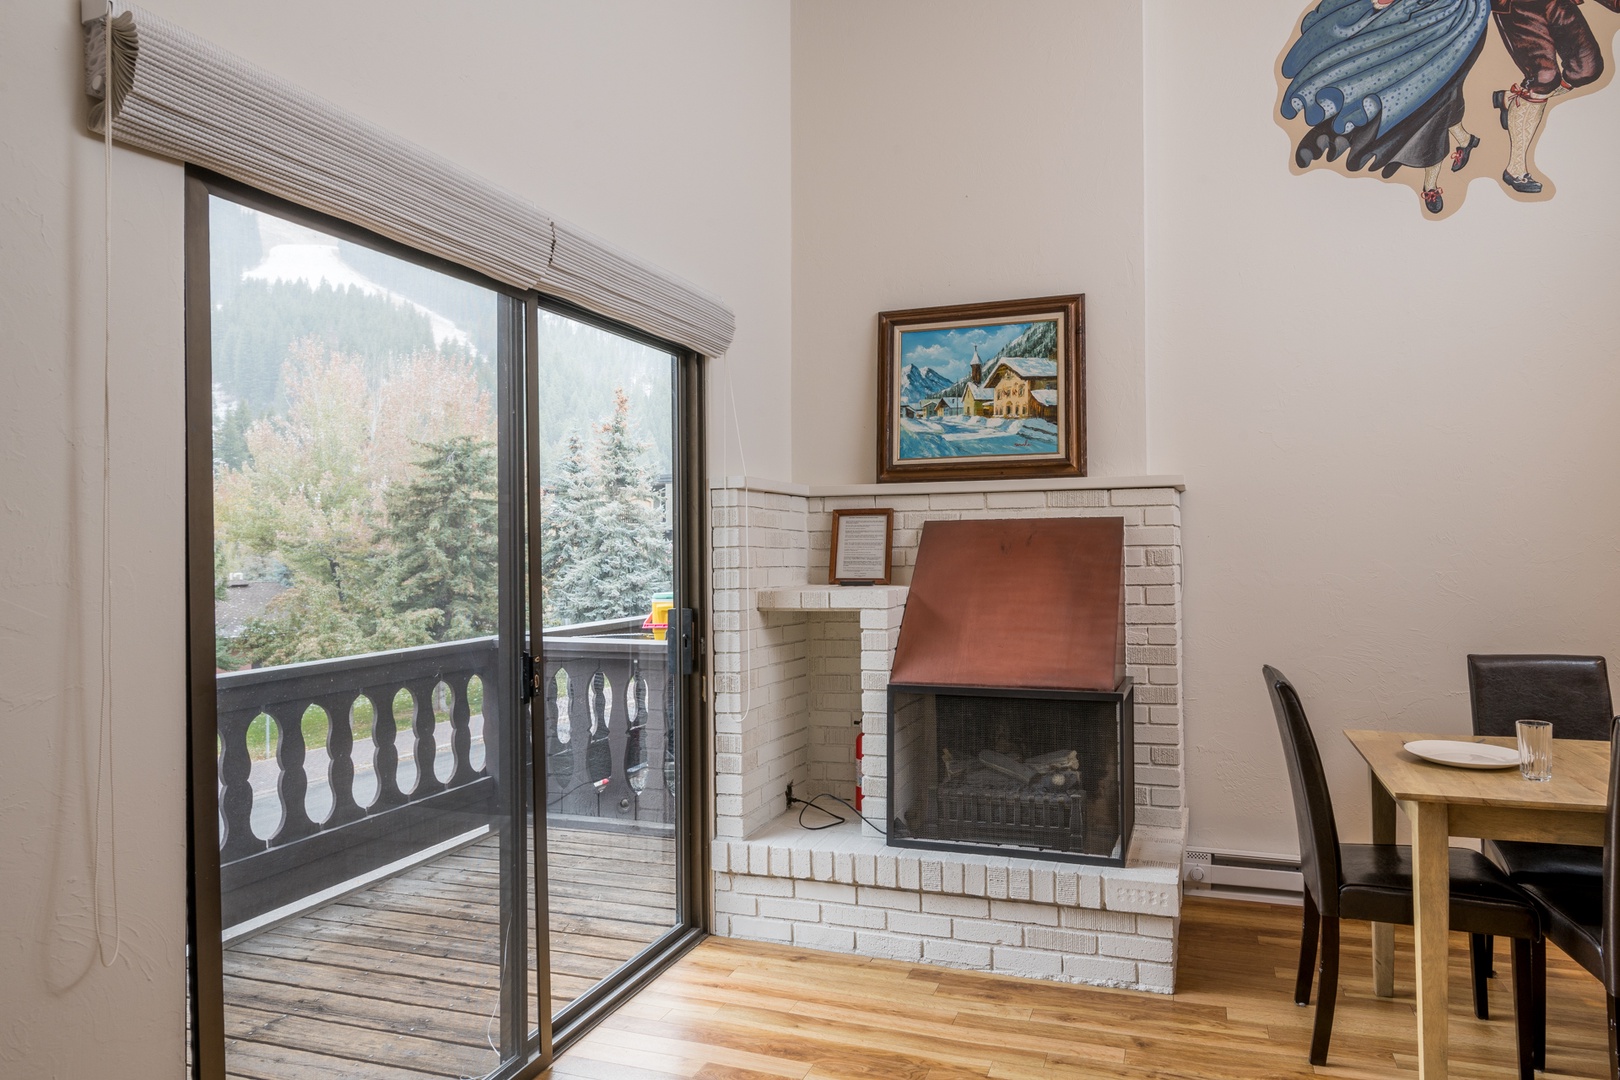 Ketchum Vacation Rentals, Bavarian Warm Springs Charm - Cozy Fireplace and Private Balcony with Views